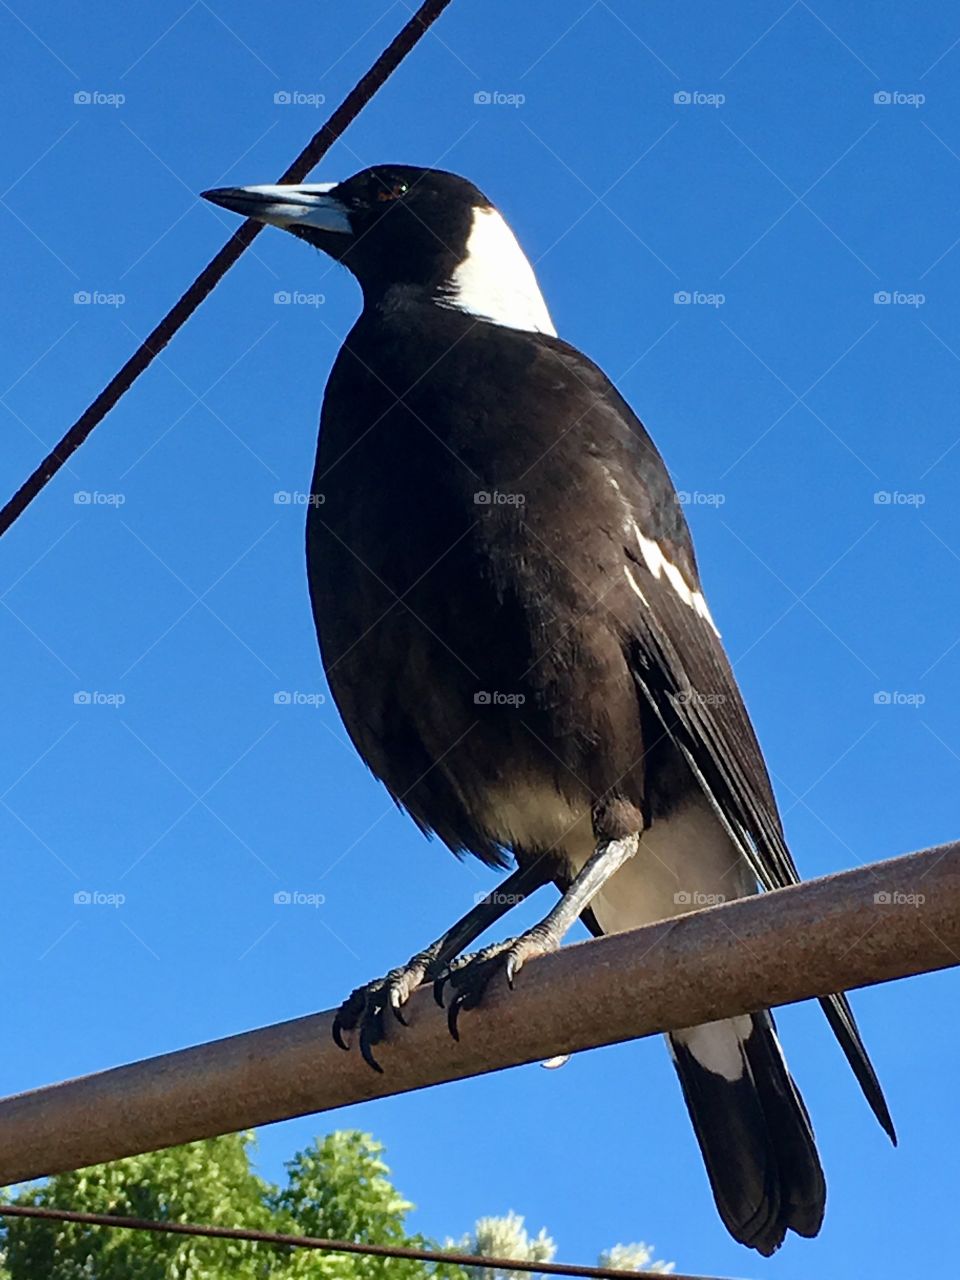 Closeup view large magpie bird perched on a metal pole outdoor blue sky